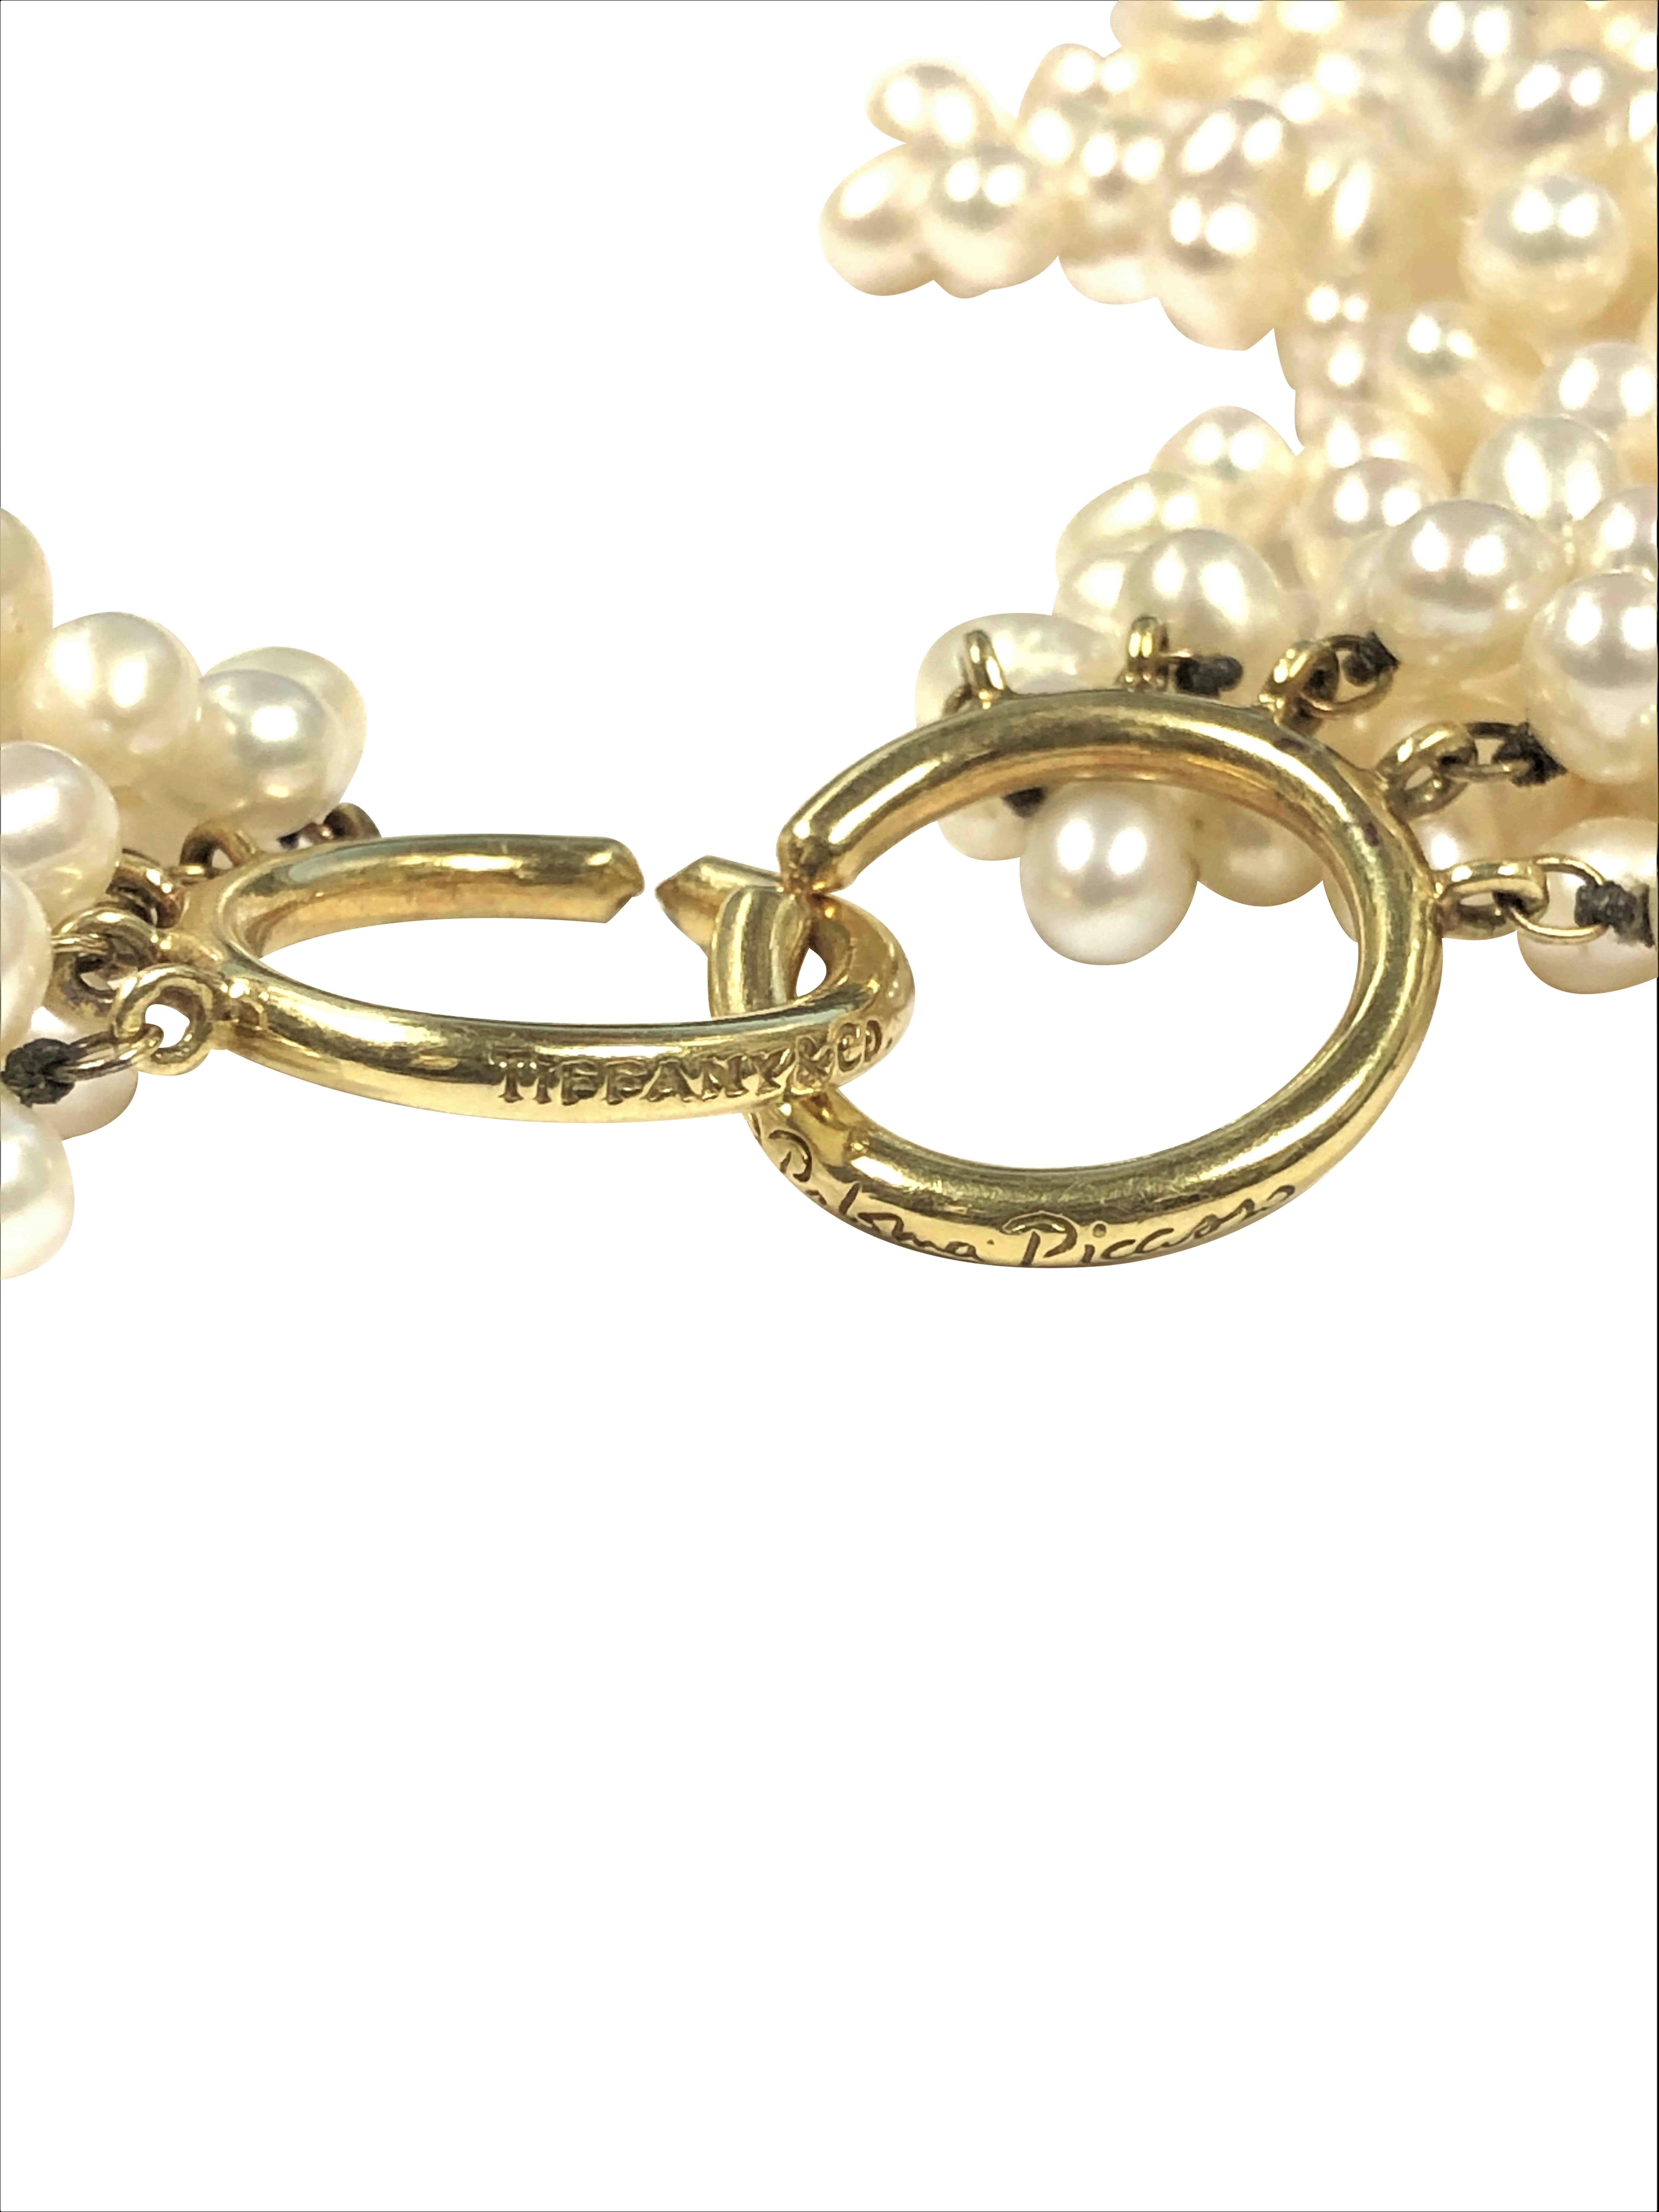 Circa 2000 Paloma Picasso for Tiffany & Company Pearl Torsade Necklace. Consisting of 8 strands of fine White Luster, fresh Water Pearls measuring 5.5 X 4.5 MM, 18K Yellow Gold Torsade clasp. 2 3/4 inches wide and 17 inches in length. Comes in